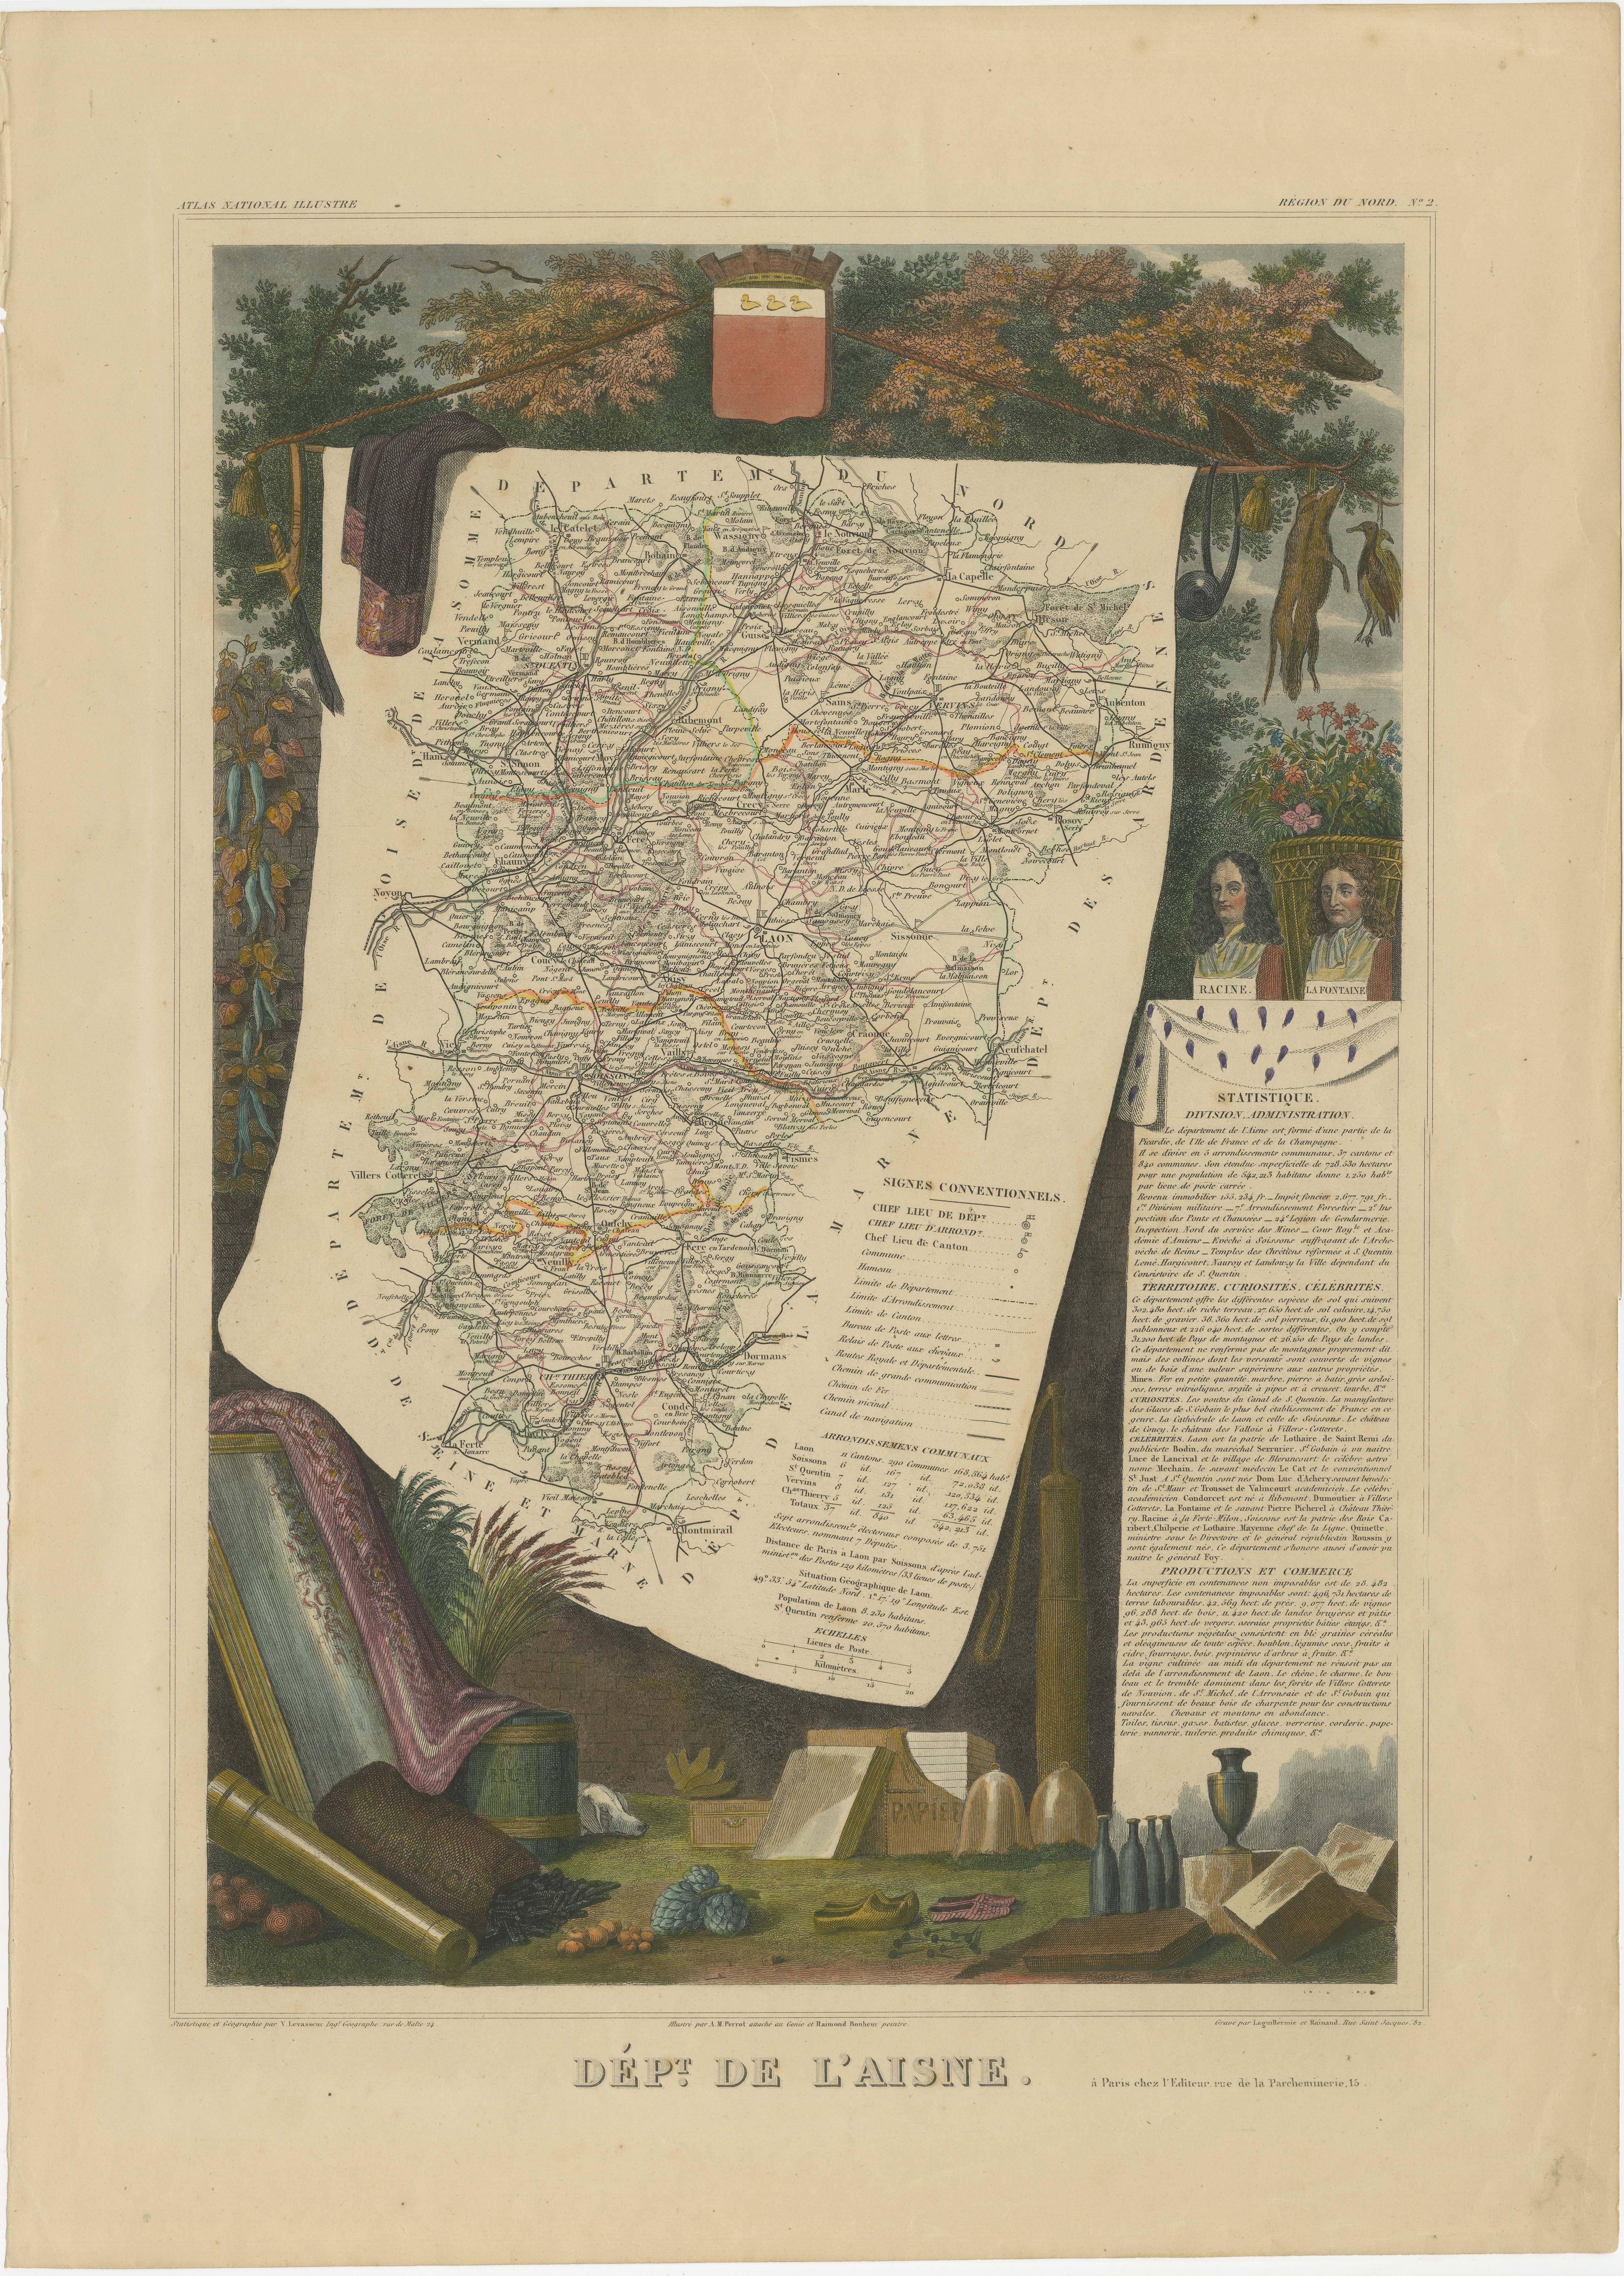 Antique map titled 'Dépt. de l'Aisne'. Map of the French department of l'Aisne, France. The whole is surrounded by elaborate decorative engravings designed to illustrate both the natural beauty and trade richness of the land. There is a short